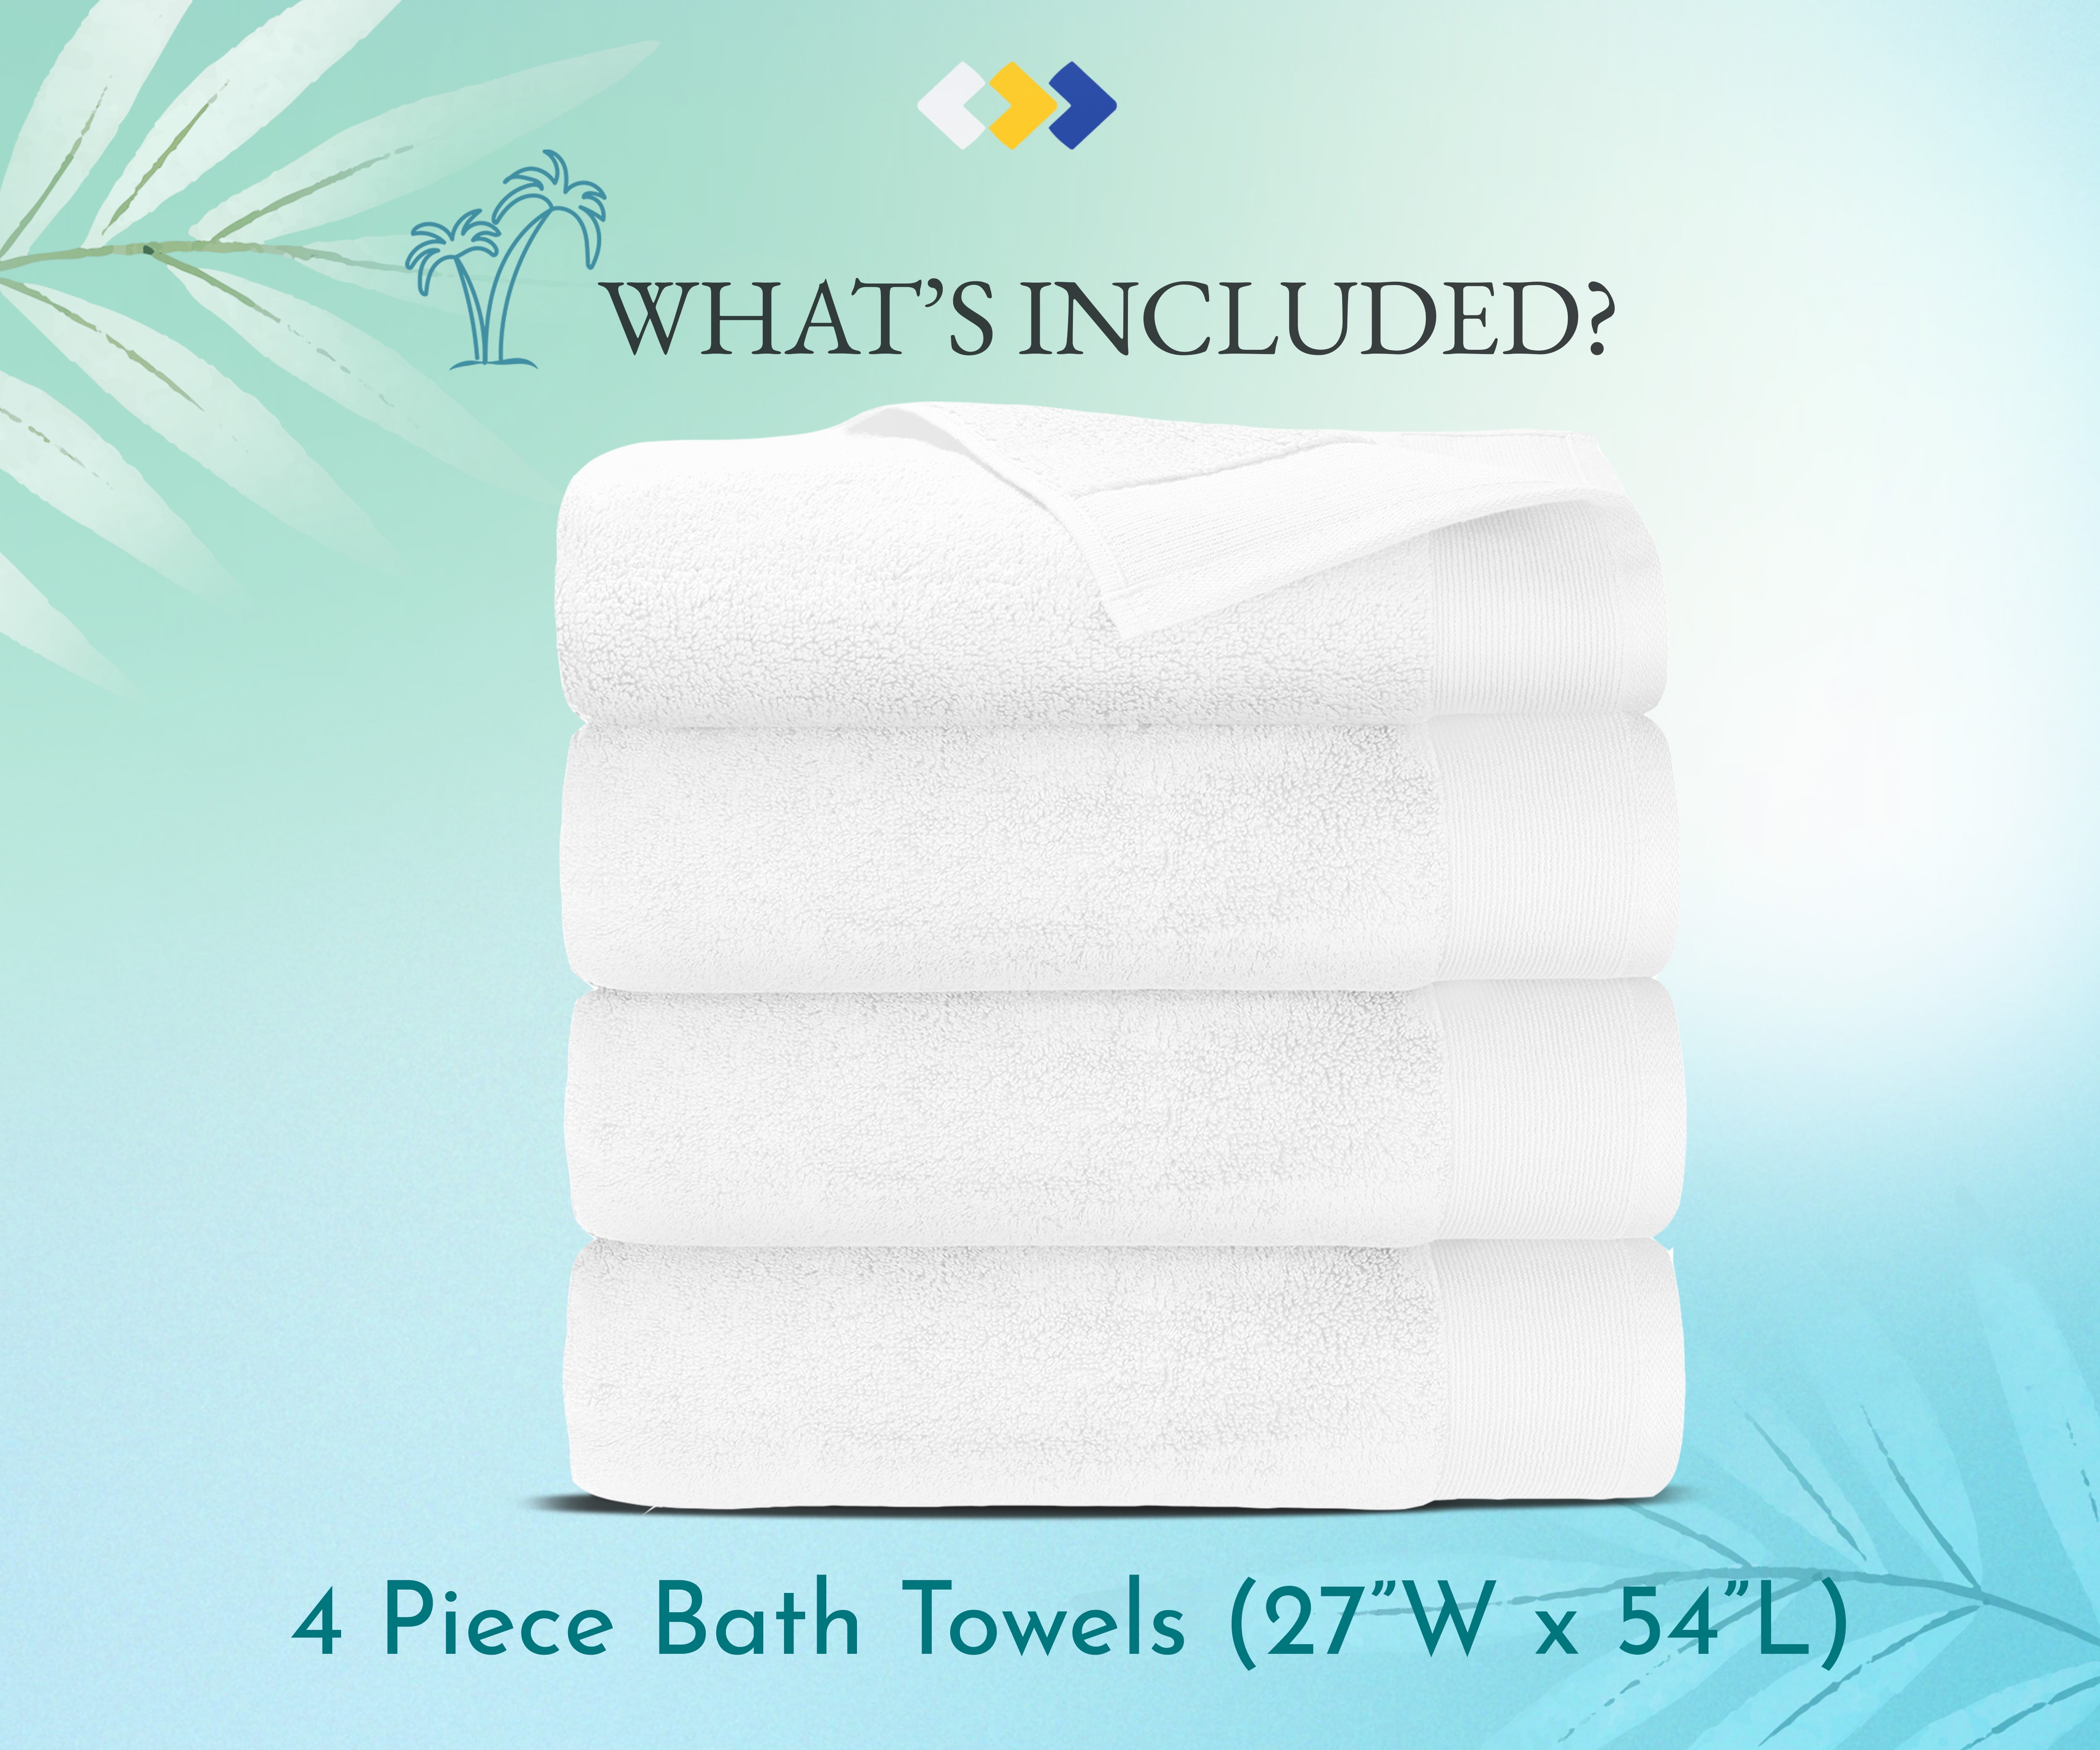 TowelFirst 5-Pack Extra-Absorbent Bath Towel Set - Large, 27x54 Inches, 100  Percent Cotton Bath Towels - Soft and Quick Drying - Best for Bath, Pool